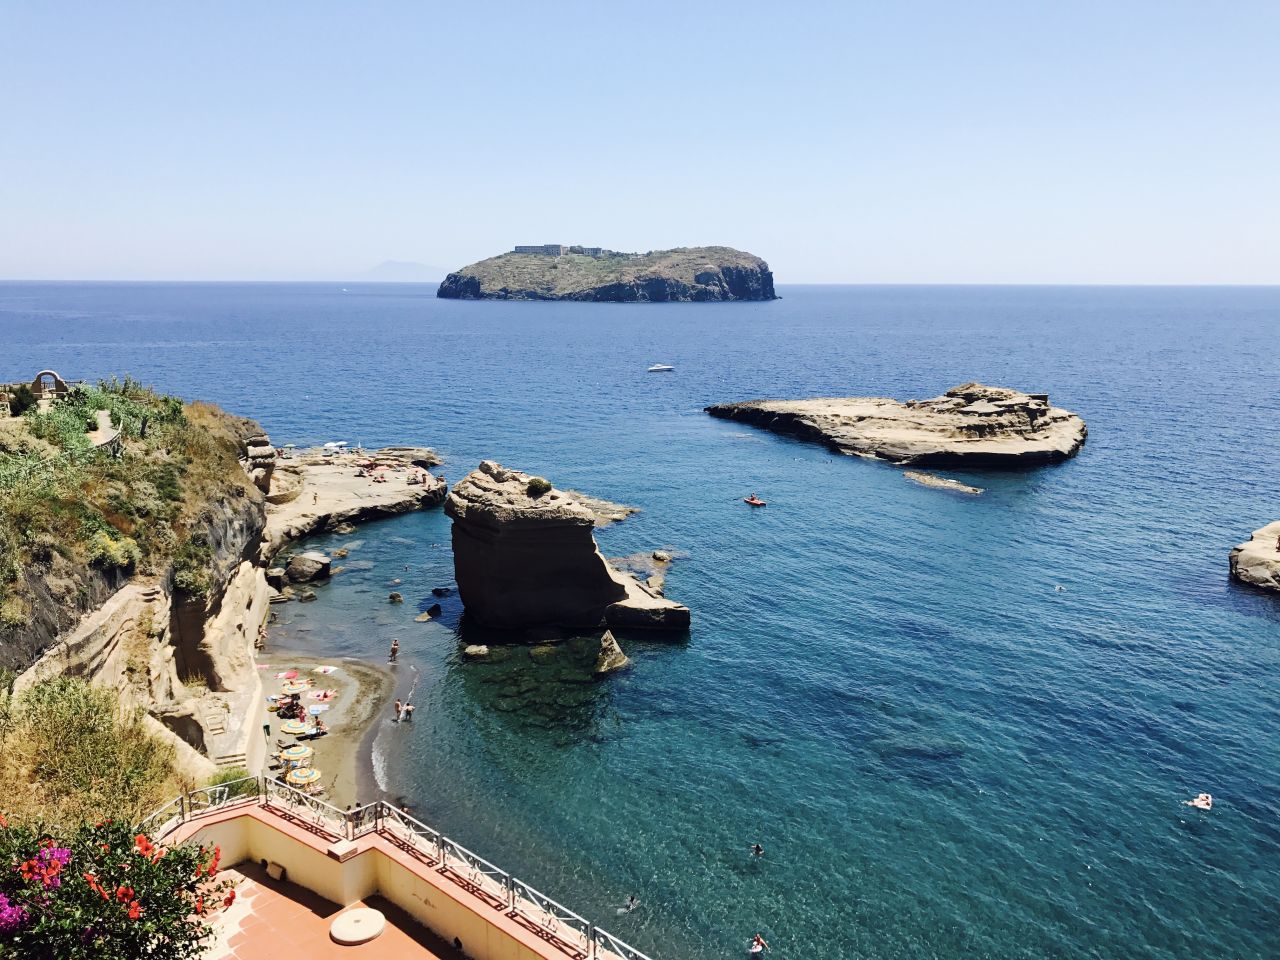 <strong>Siren calls: </strong>Ventotene is a small volcanic isle far out in the Tyrrhenian Sea west of Naples. Legend has it the sirens would sunbathe on rocks, luring sailors to their doom on craggy cliffs by screaming and wailing at them.